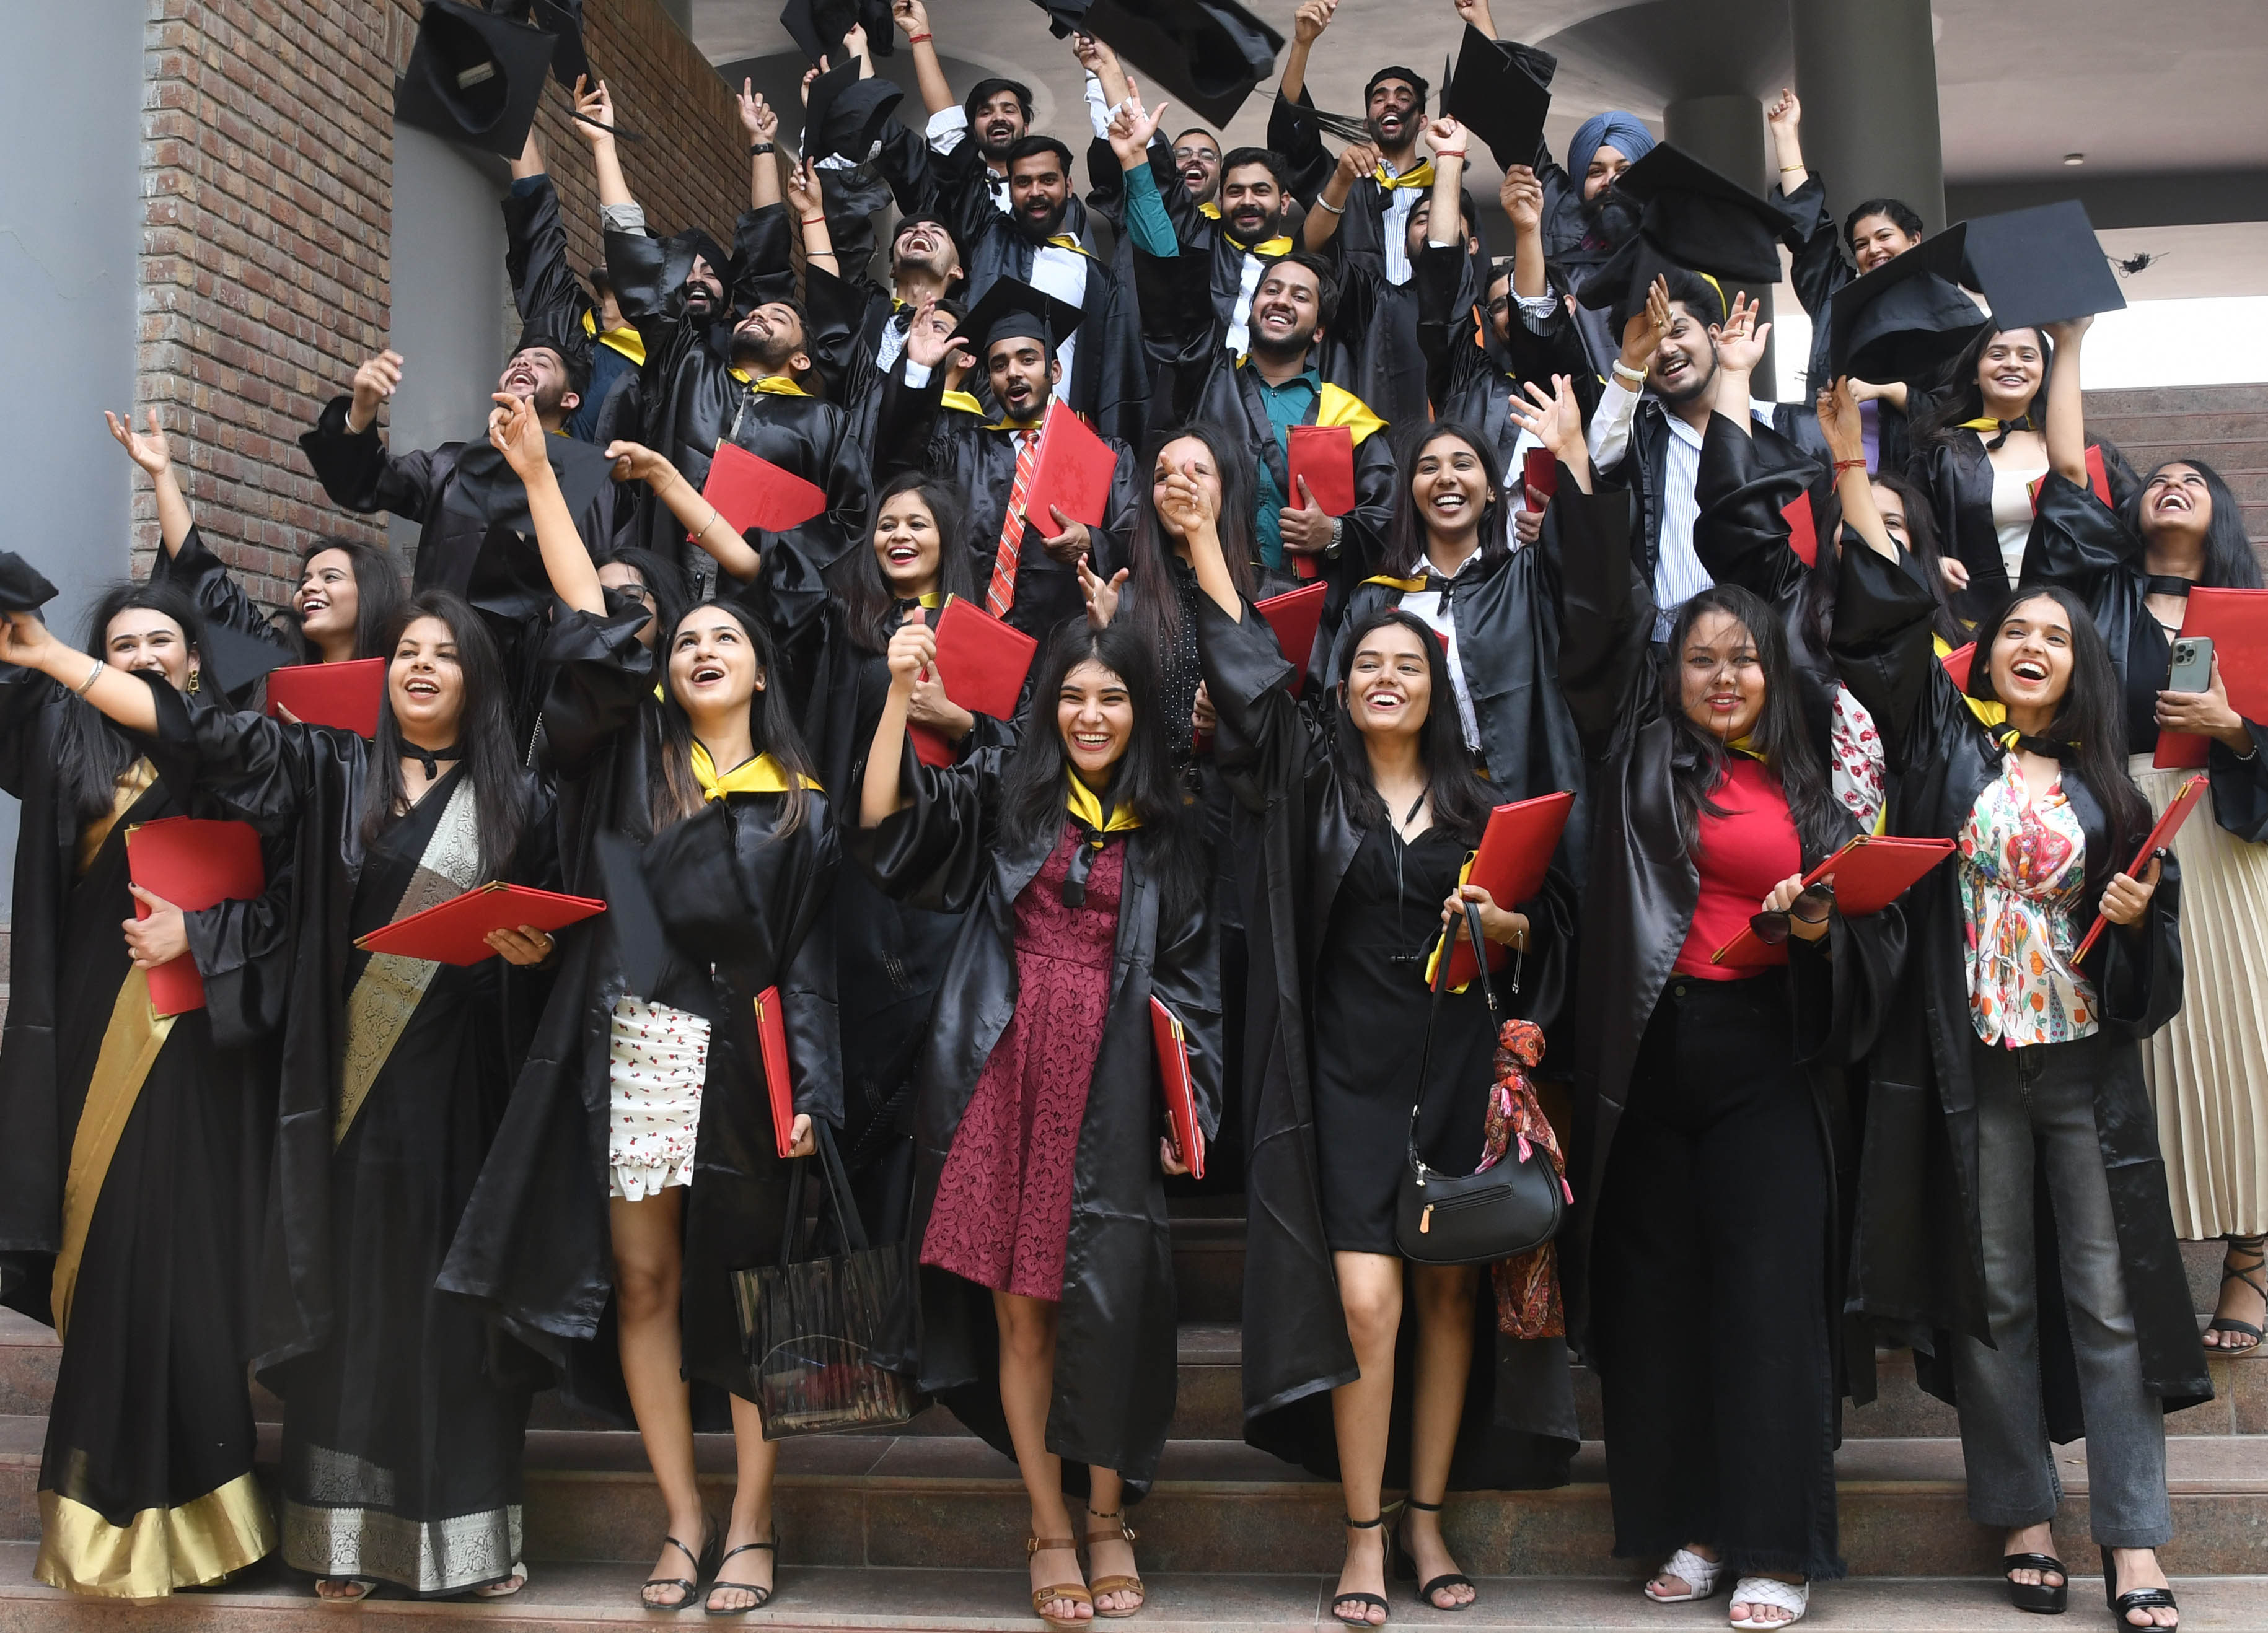 877 awarded degrees at convocation of Chandigarh University, Gharuan